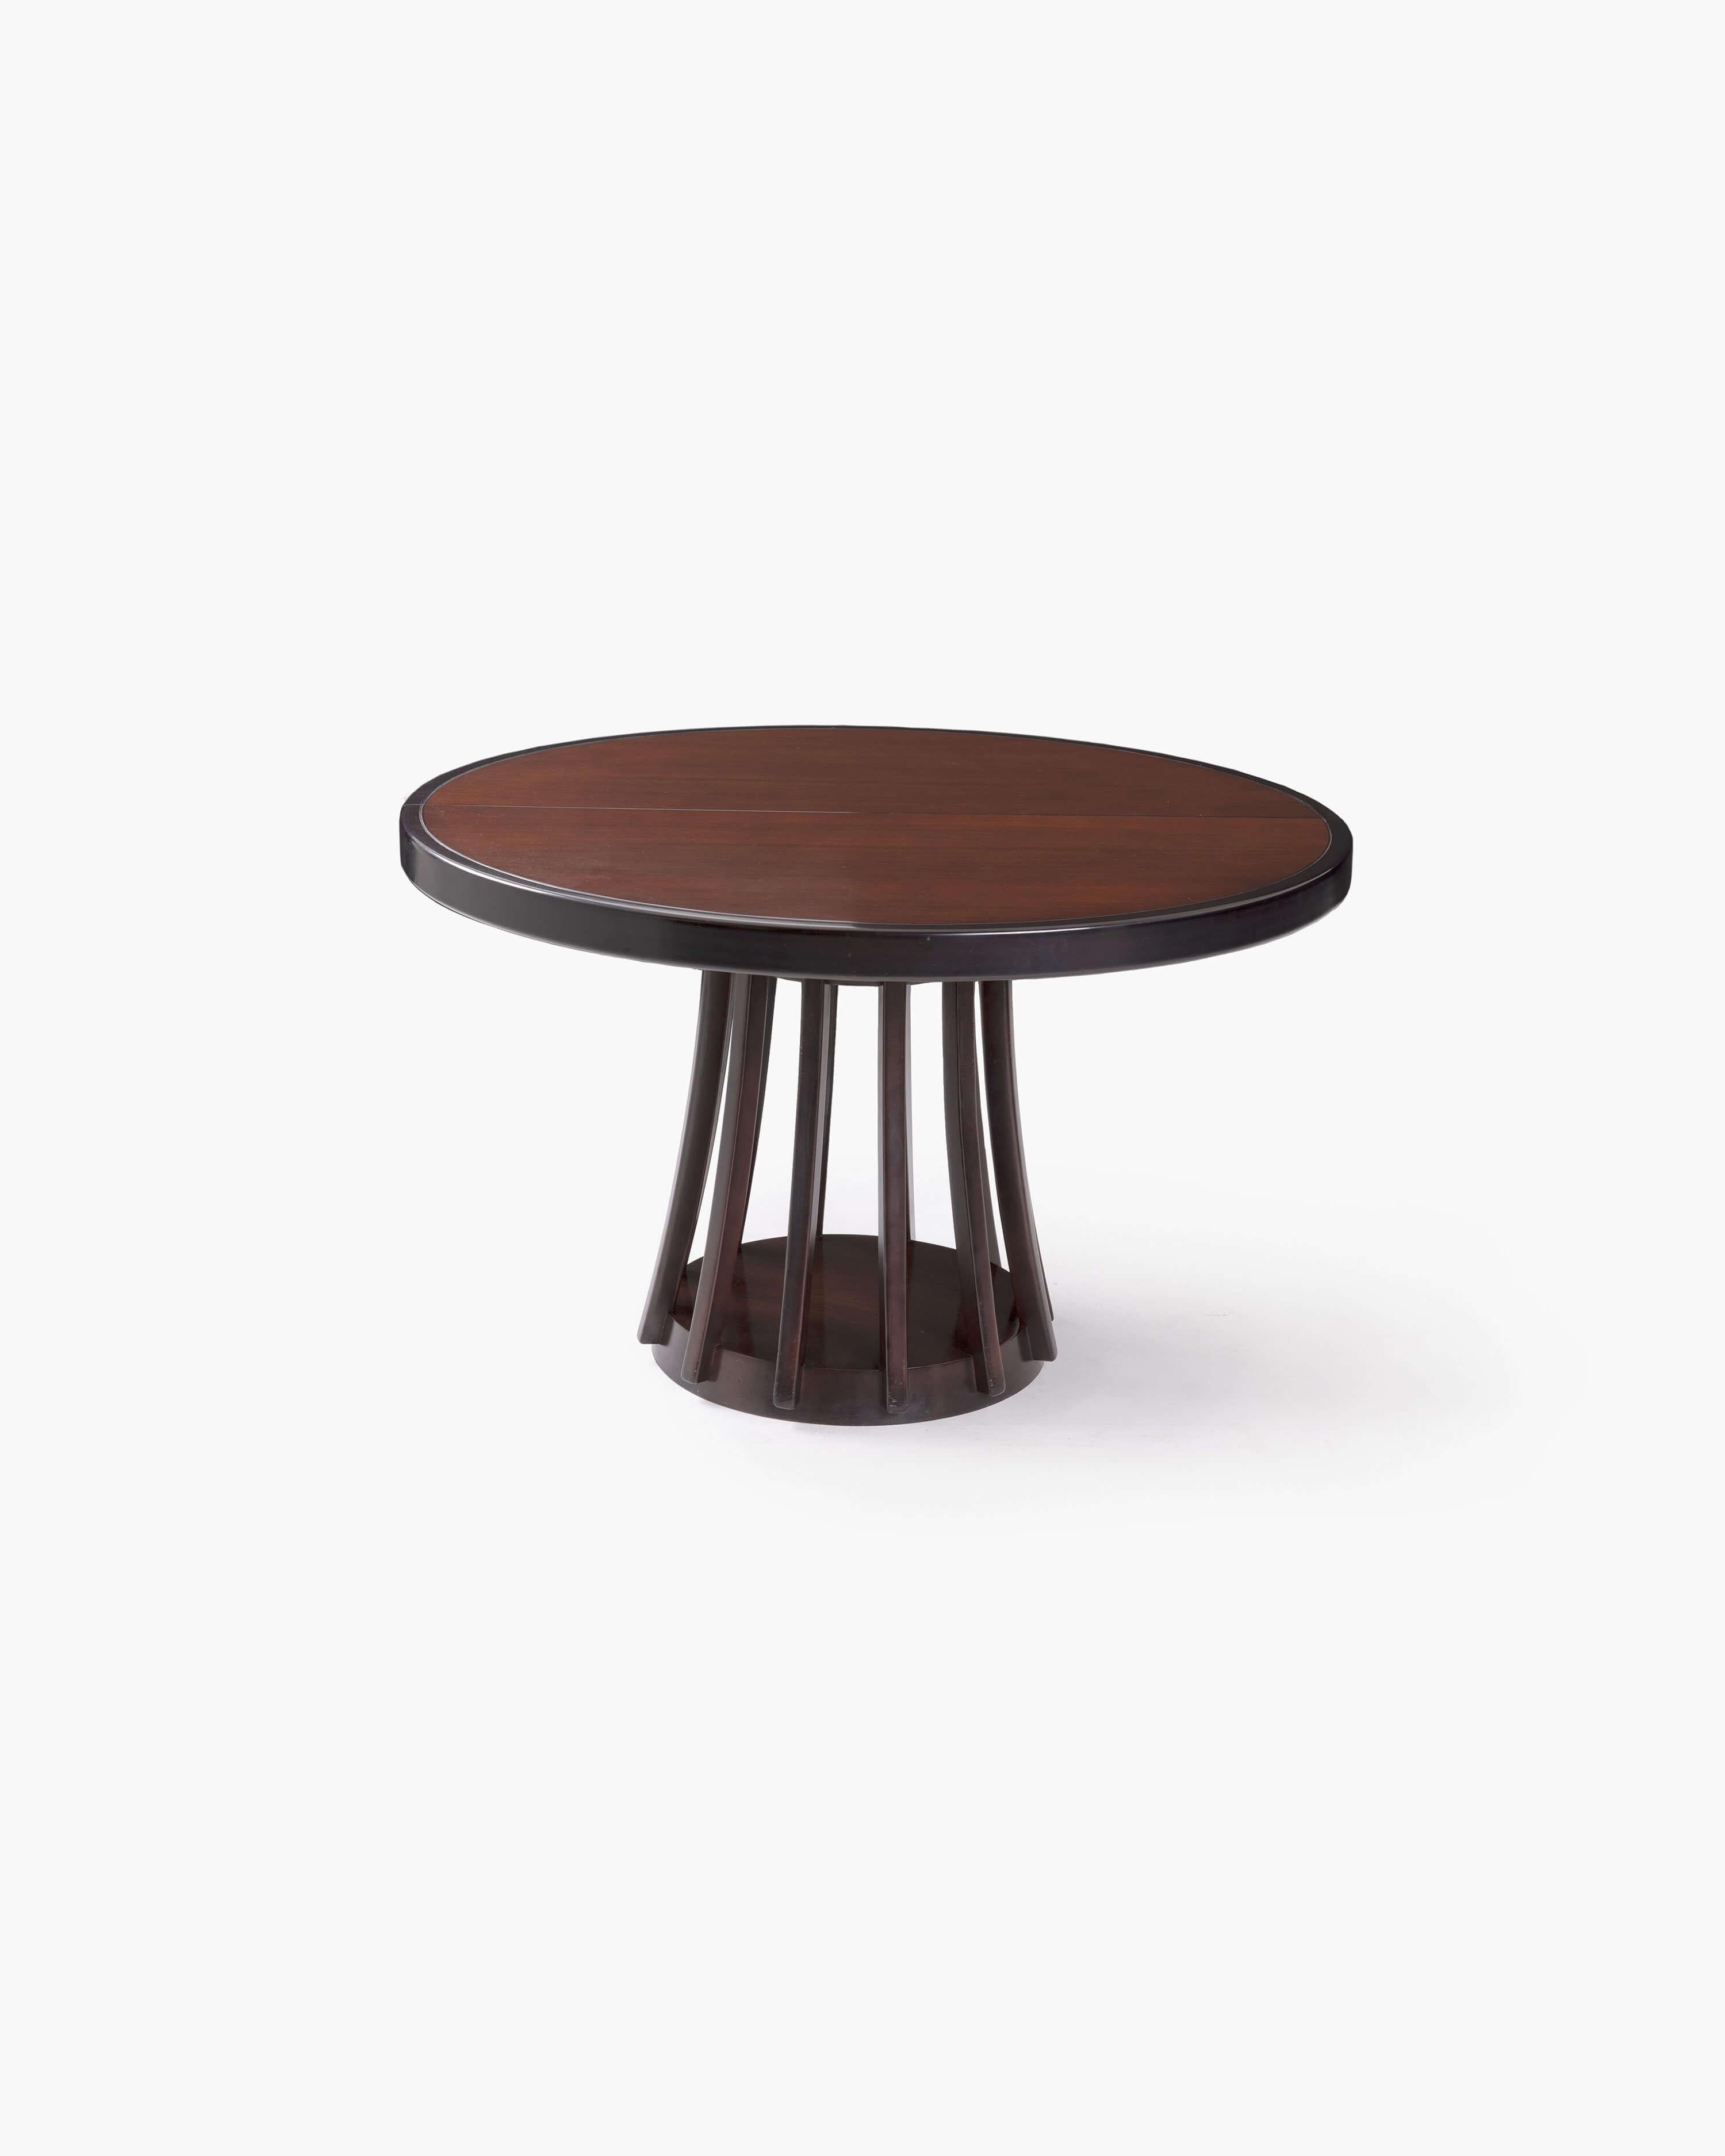 Experience the timeless elegance of Angelo Mangiarotti's design with this exquisite round extendable dining table. Created in 1972 for La Sorgente dei Mobili, a renowned member of La Permanente Mobili Cantù, this table is a true testament to